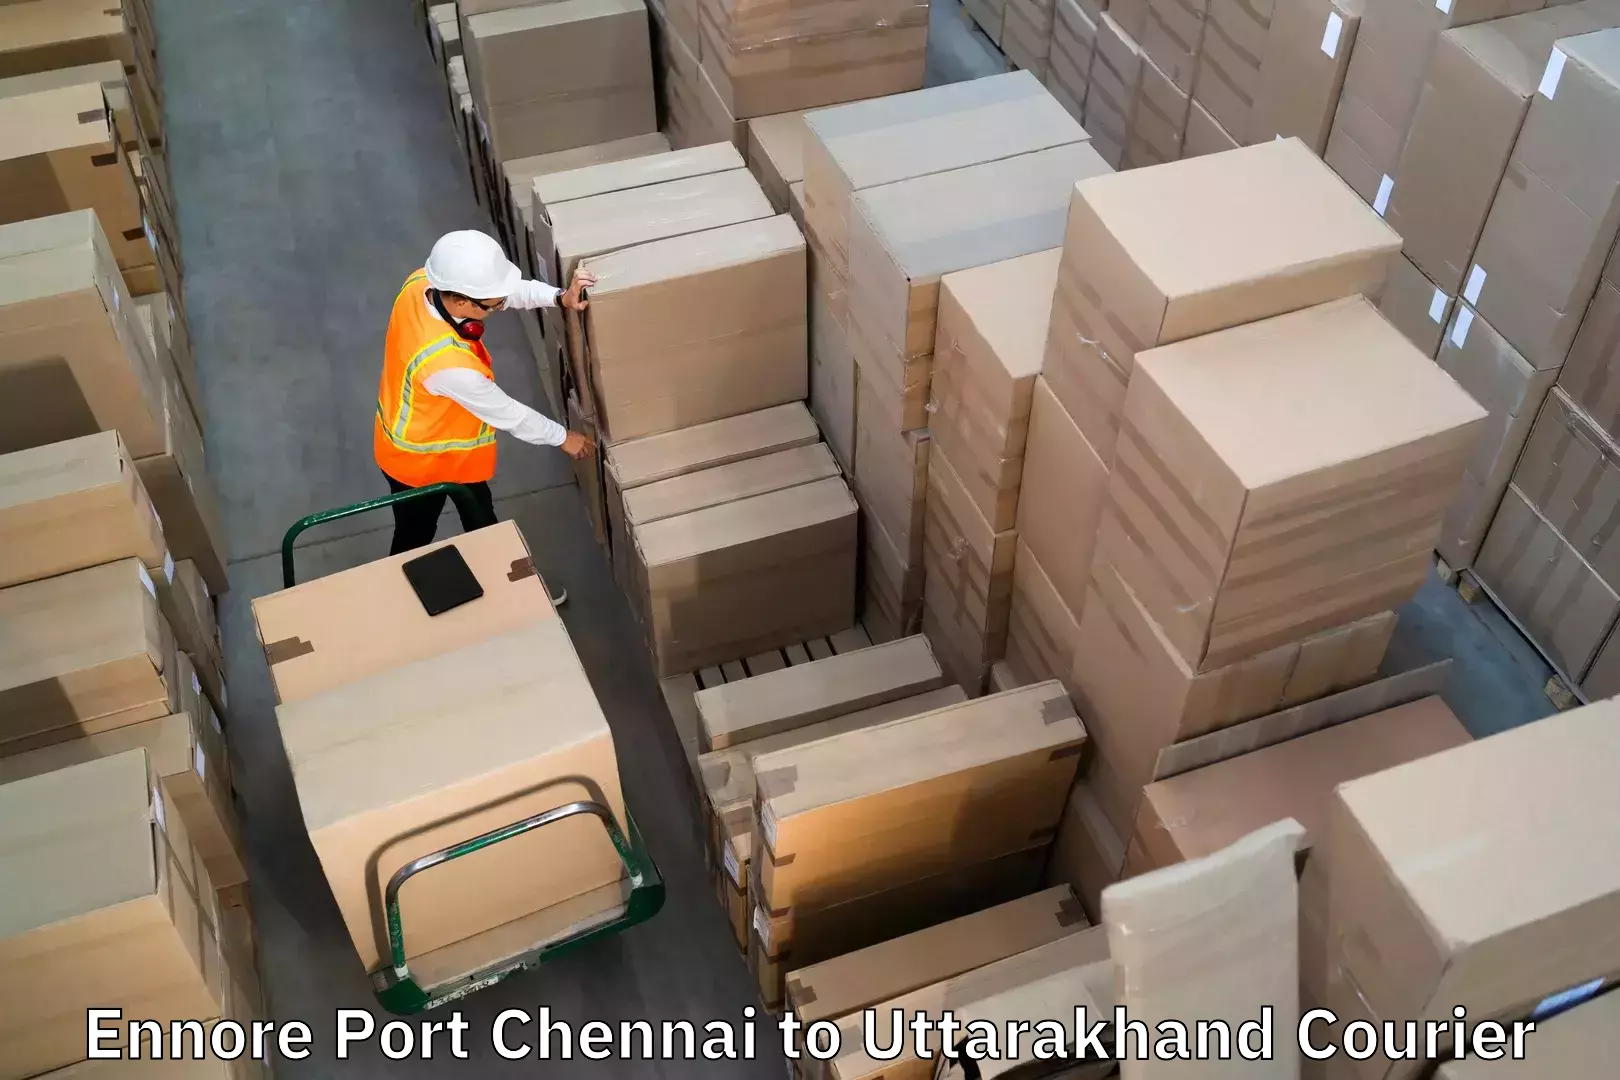 Door to door luggage delivery in Ennore Port Chennai to Didihat